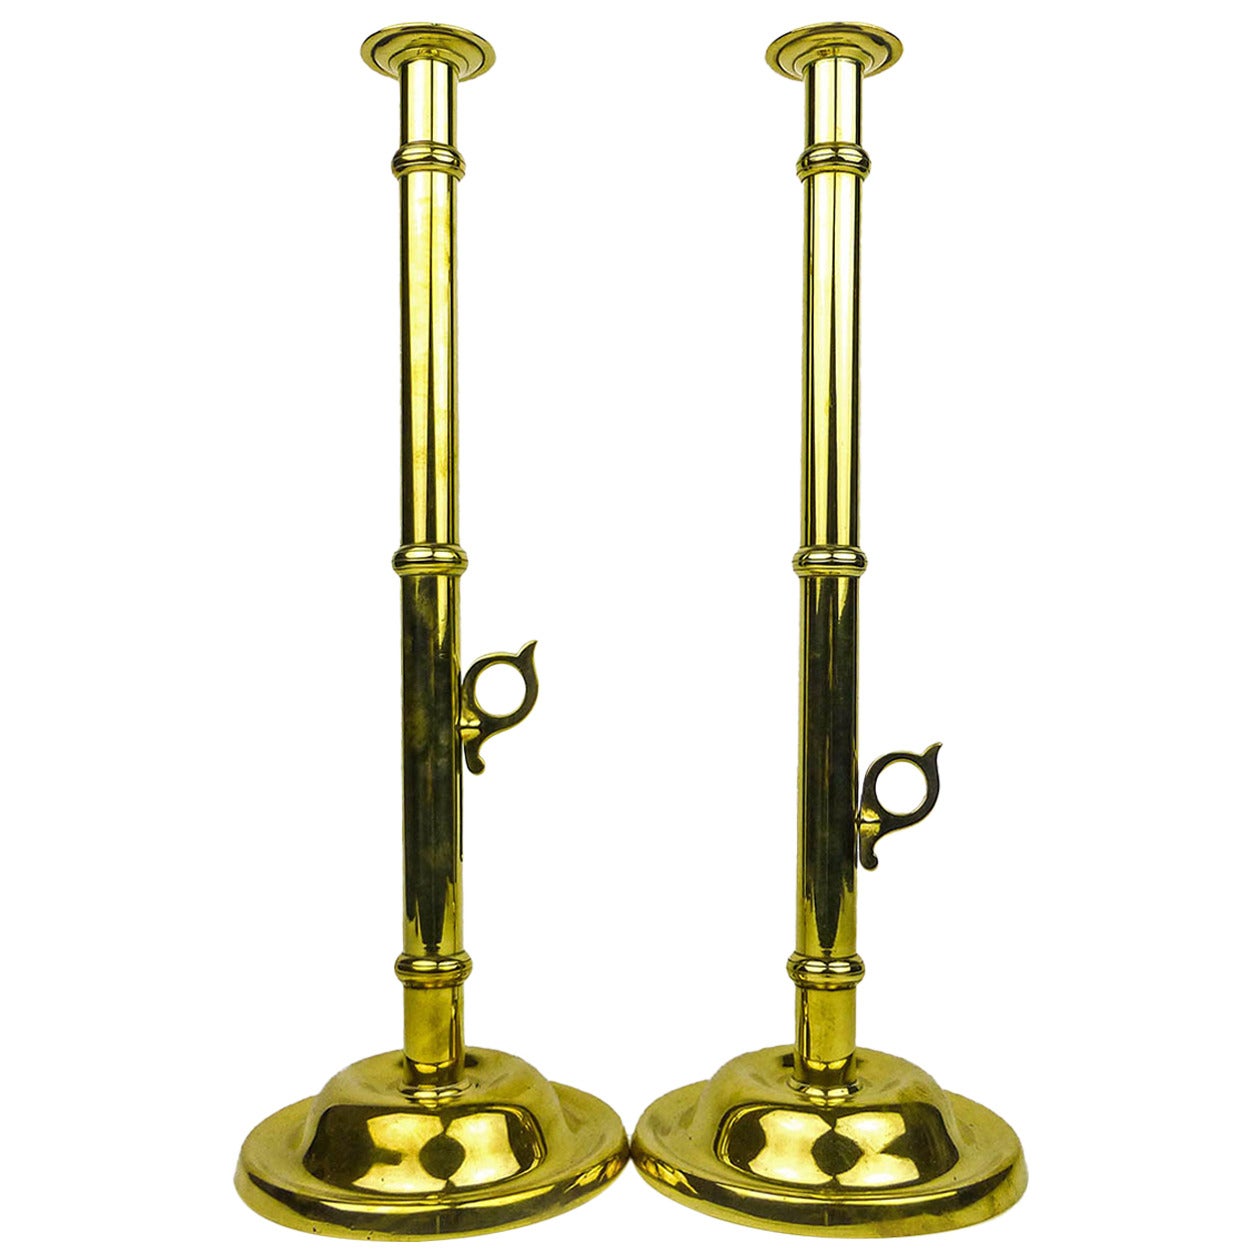 Pair of English Victorian Brass Side Ejector Pulpit Candlesticks, circa 1850 For Sale